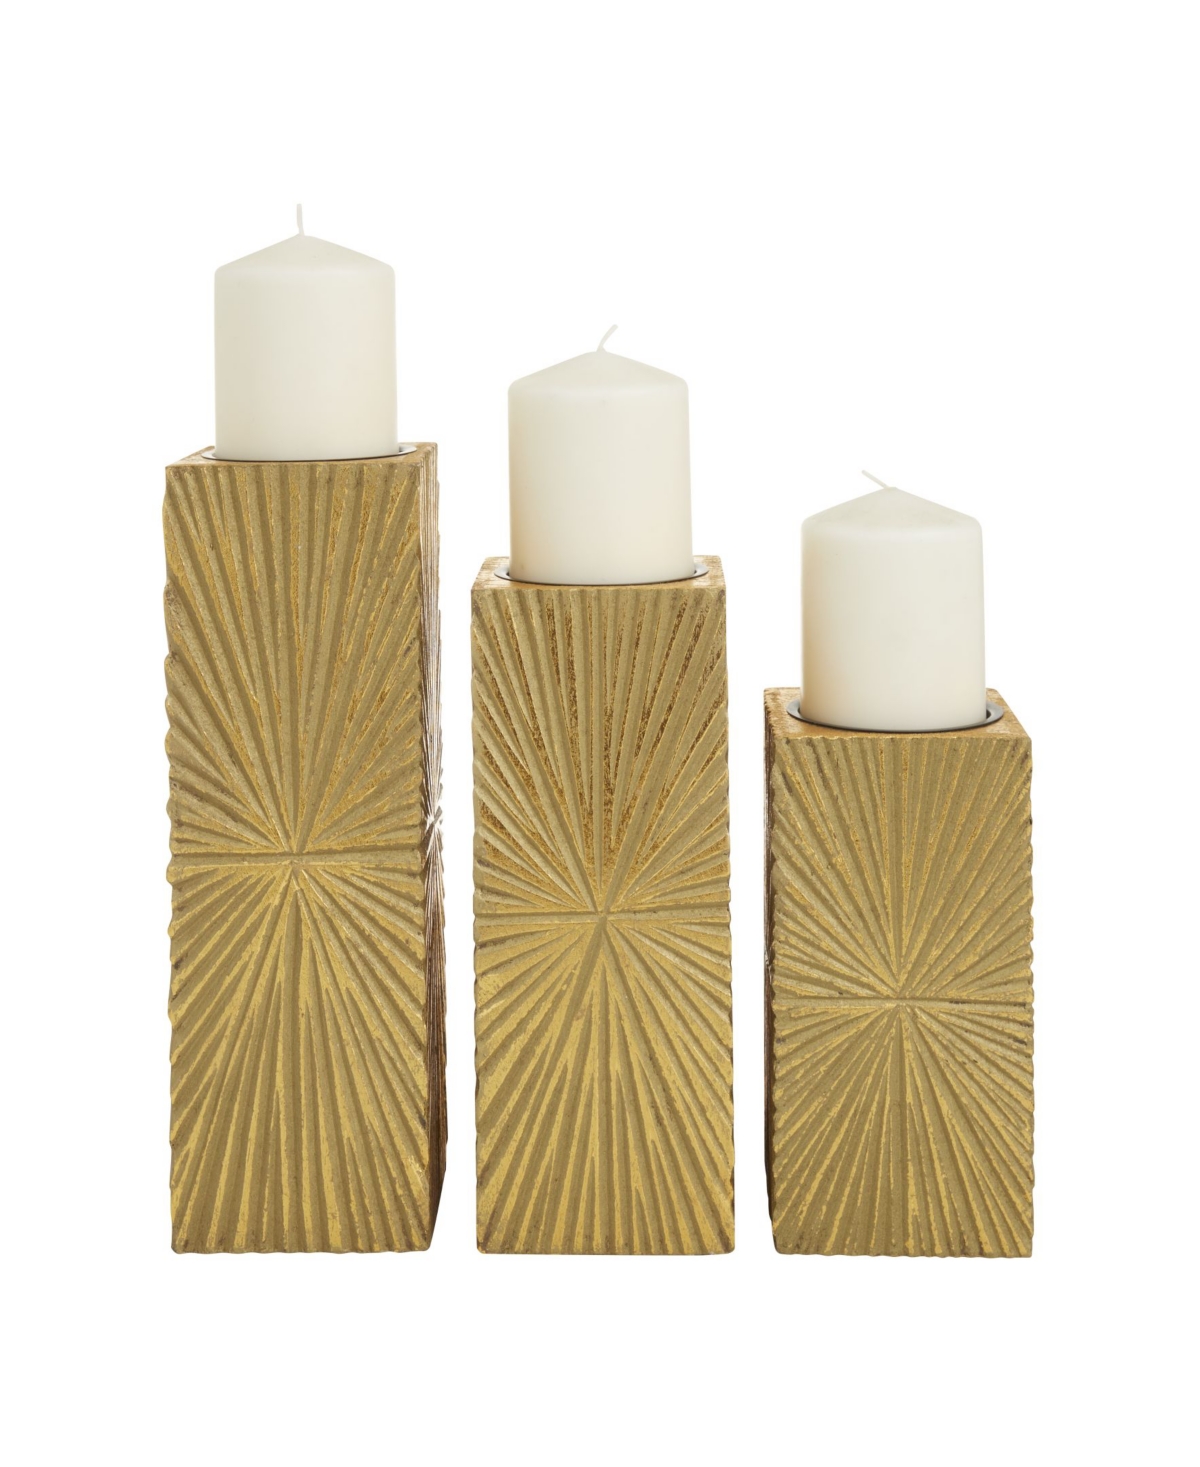 CosmoLiving by Cosmopolitan Mdf Contemporary Candle Holder, Set of 3